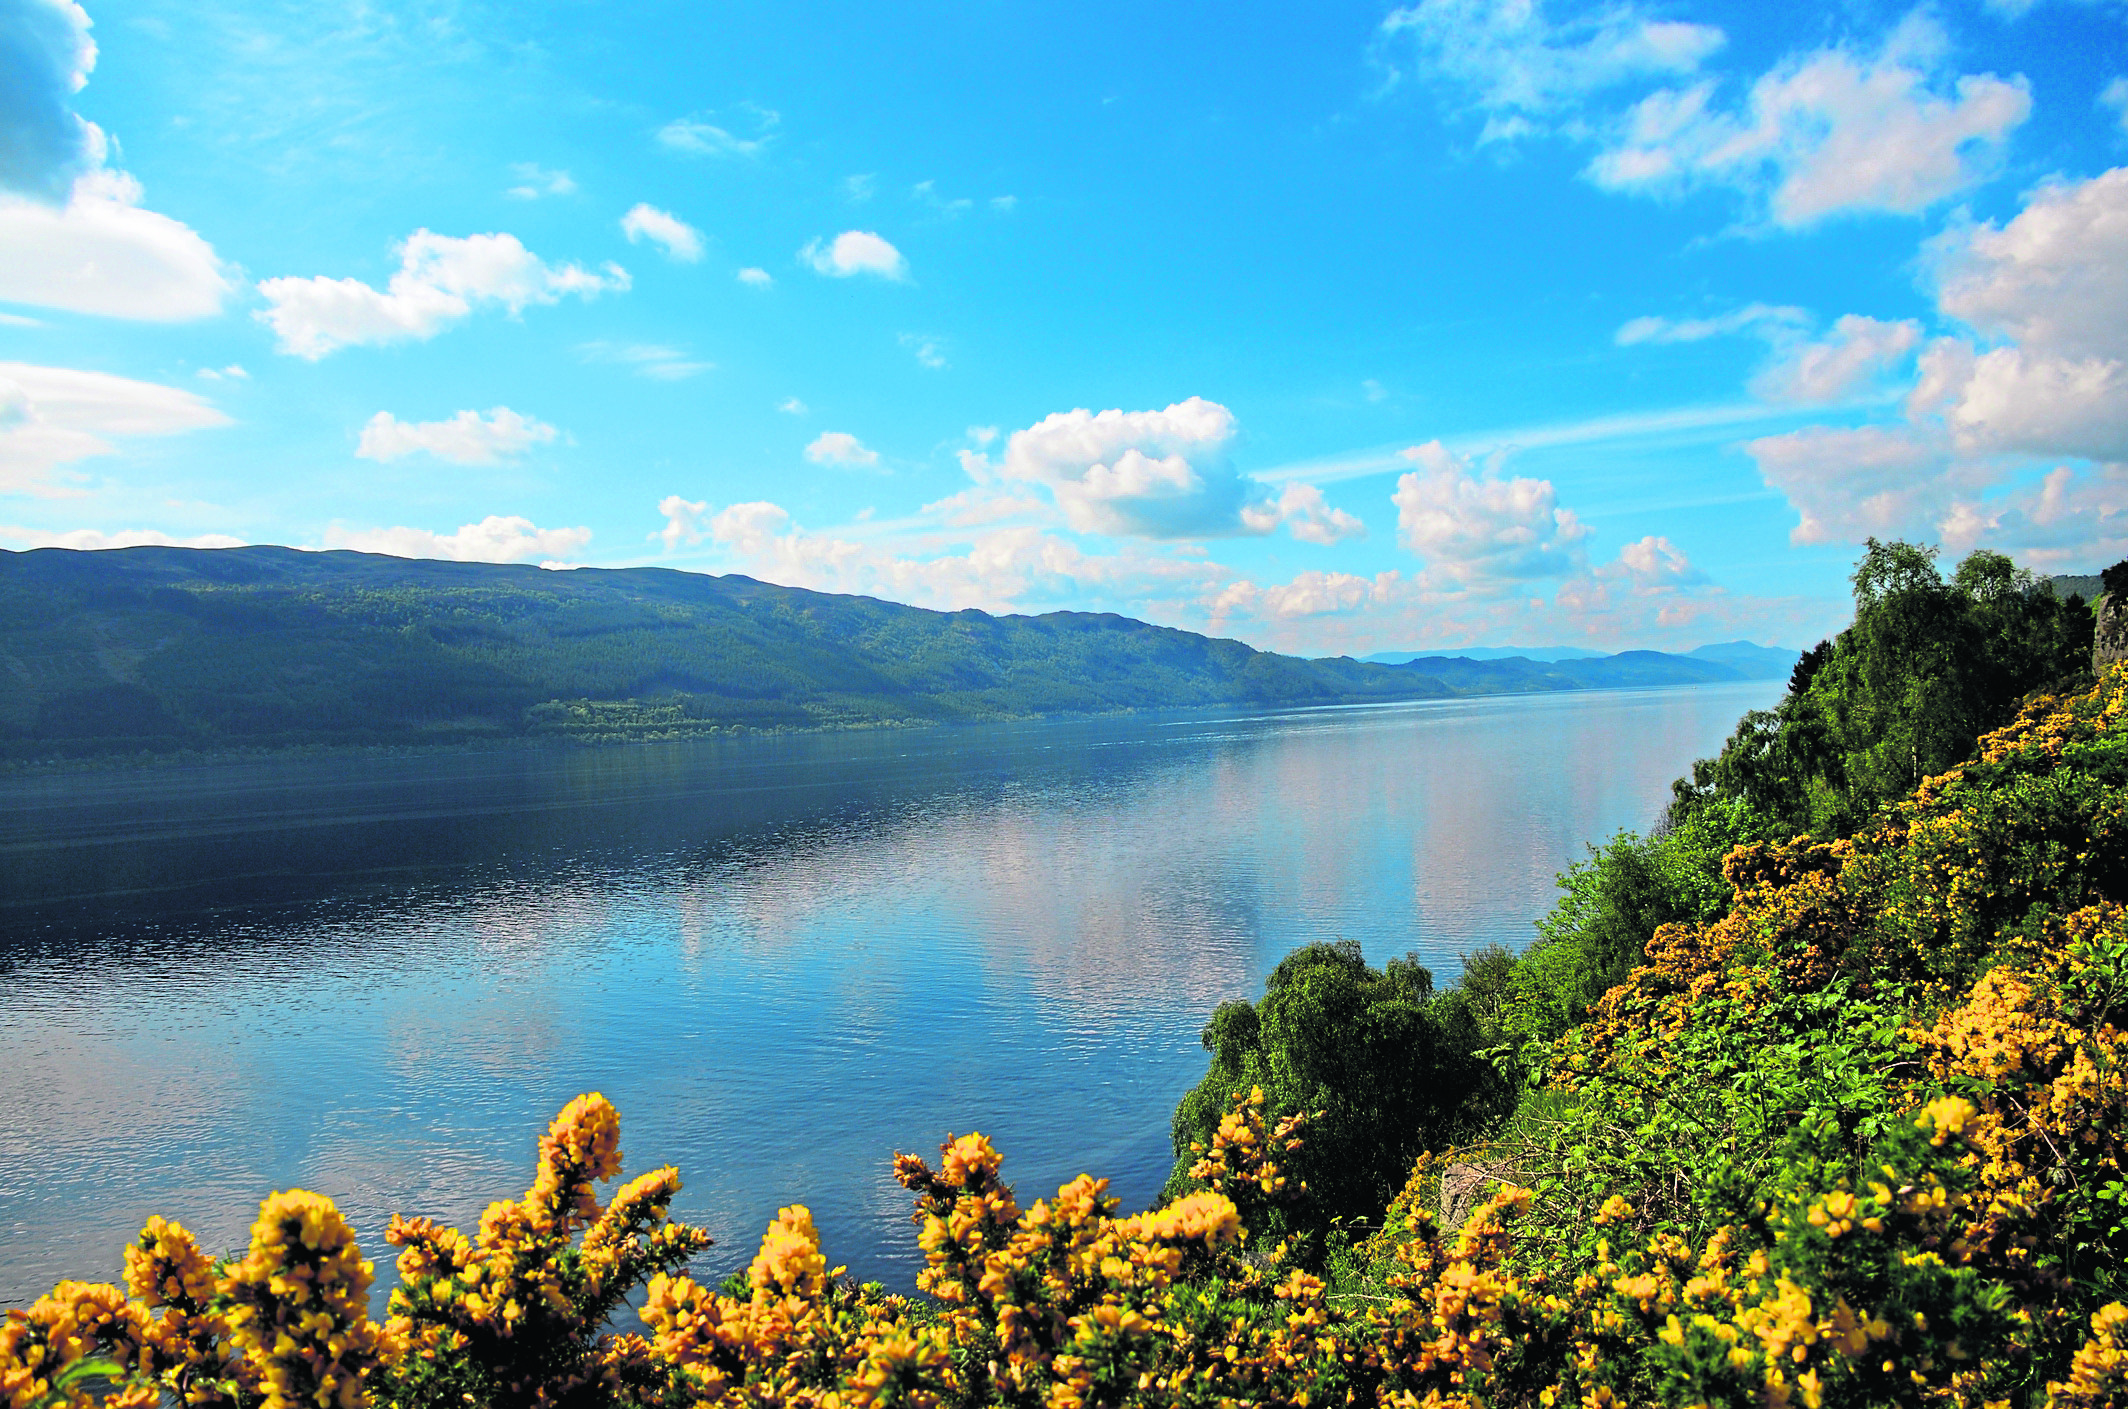 A new state of the art Water Treatment Works will fresh drinking water from Loch Ness